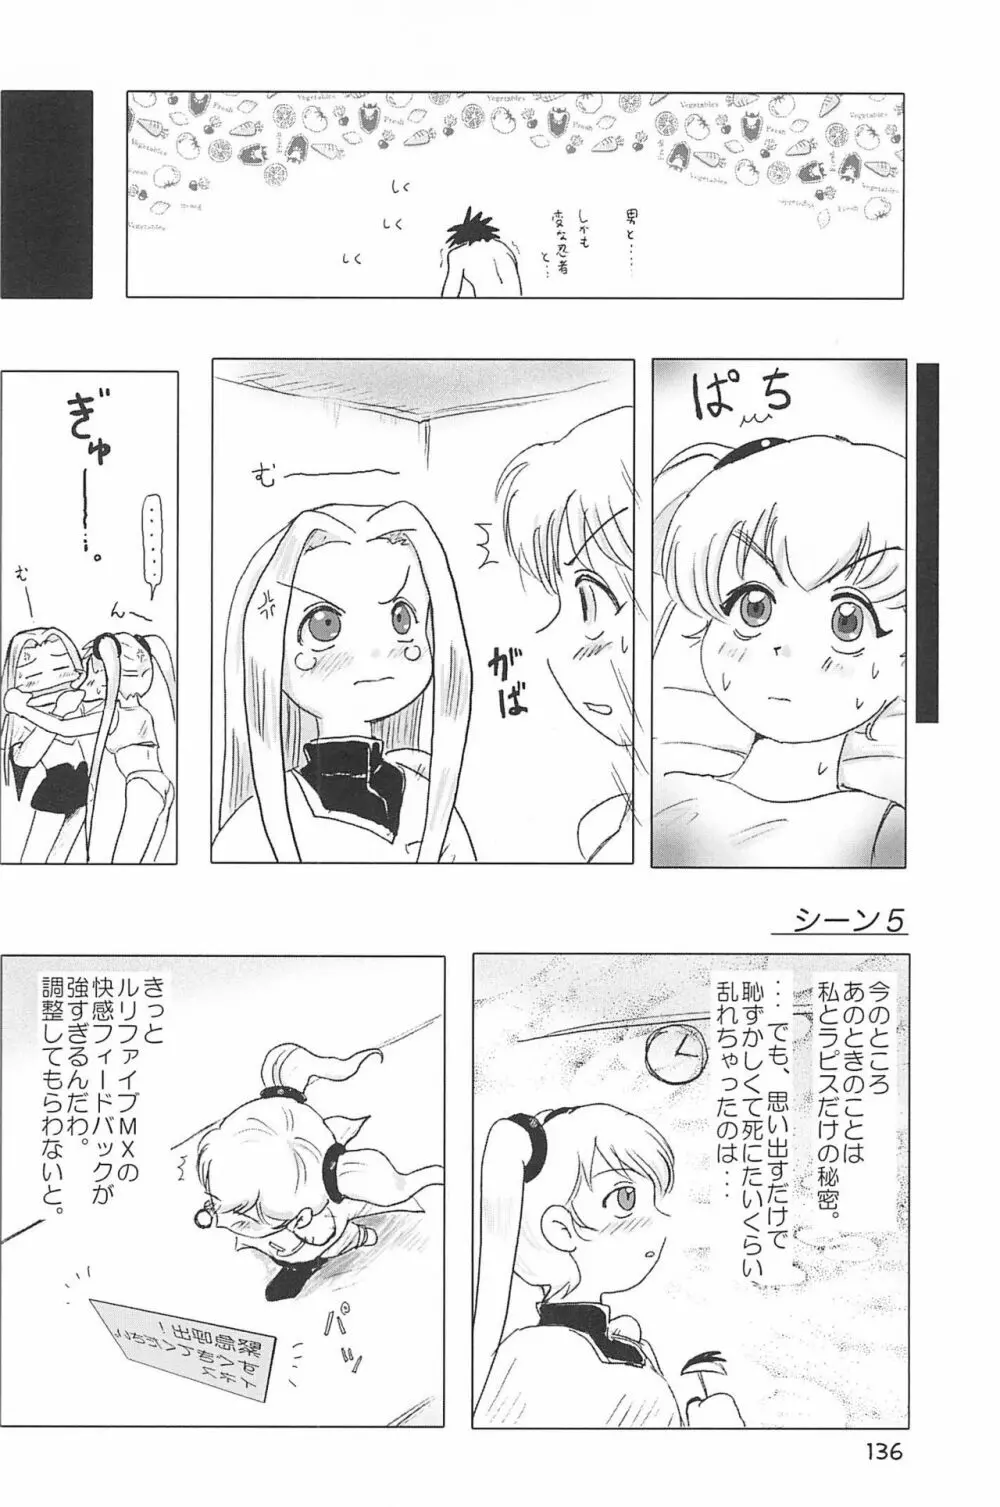 ND-special Volume 4 136ページ